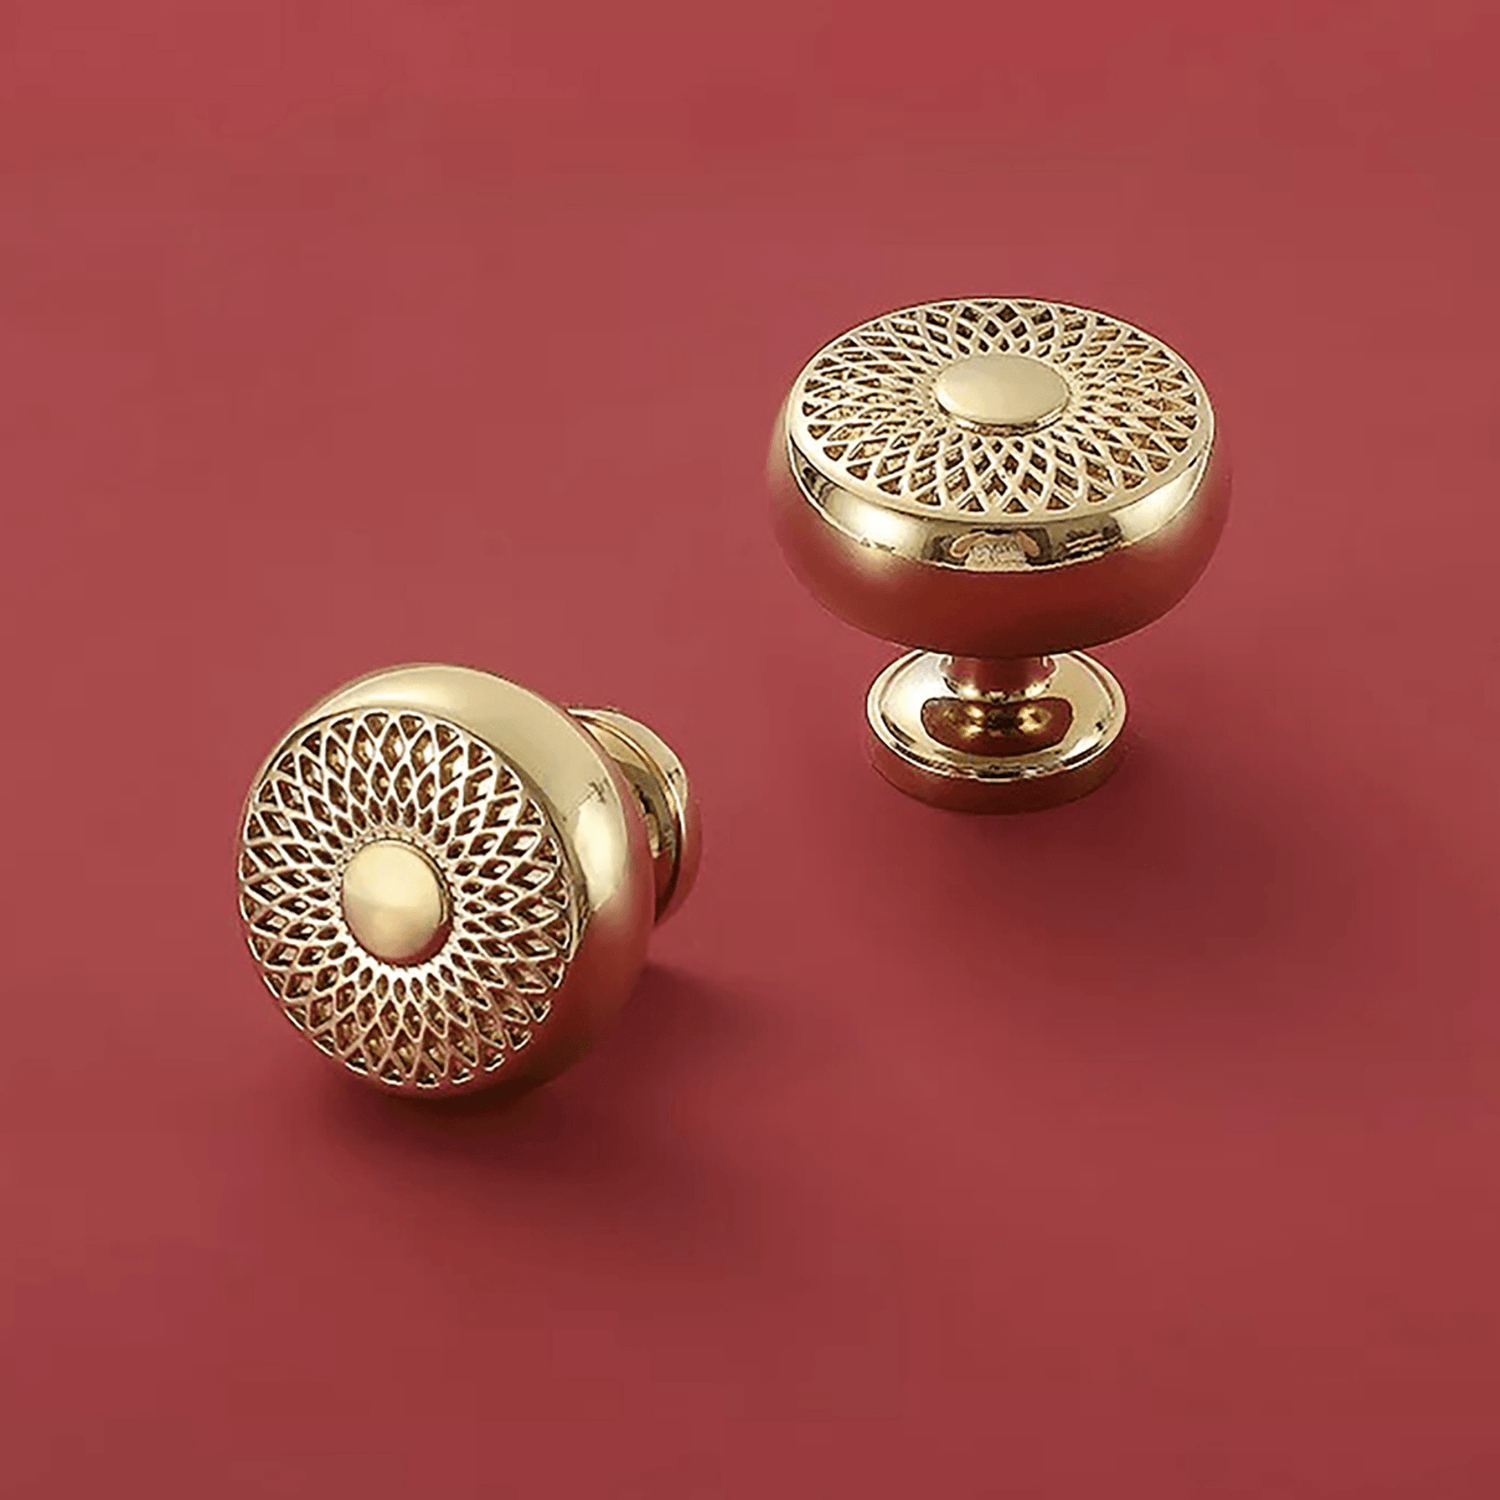 The image features a Gold Decorative round design brass knob placed on the floor against a maroon background. The knob has a circular shape and is made of brass material with a decorative design on the front. The knob is positioned on the floor, showcasing its shiny gold finish against the rich maroon backdrop. Its elegant and ornate design adds a touch of sophistication to any space. 